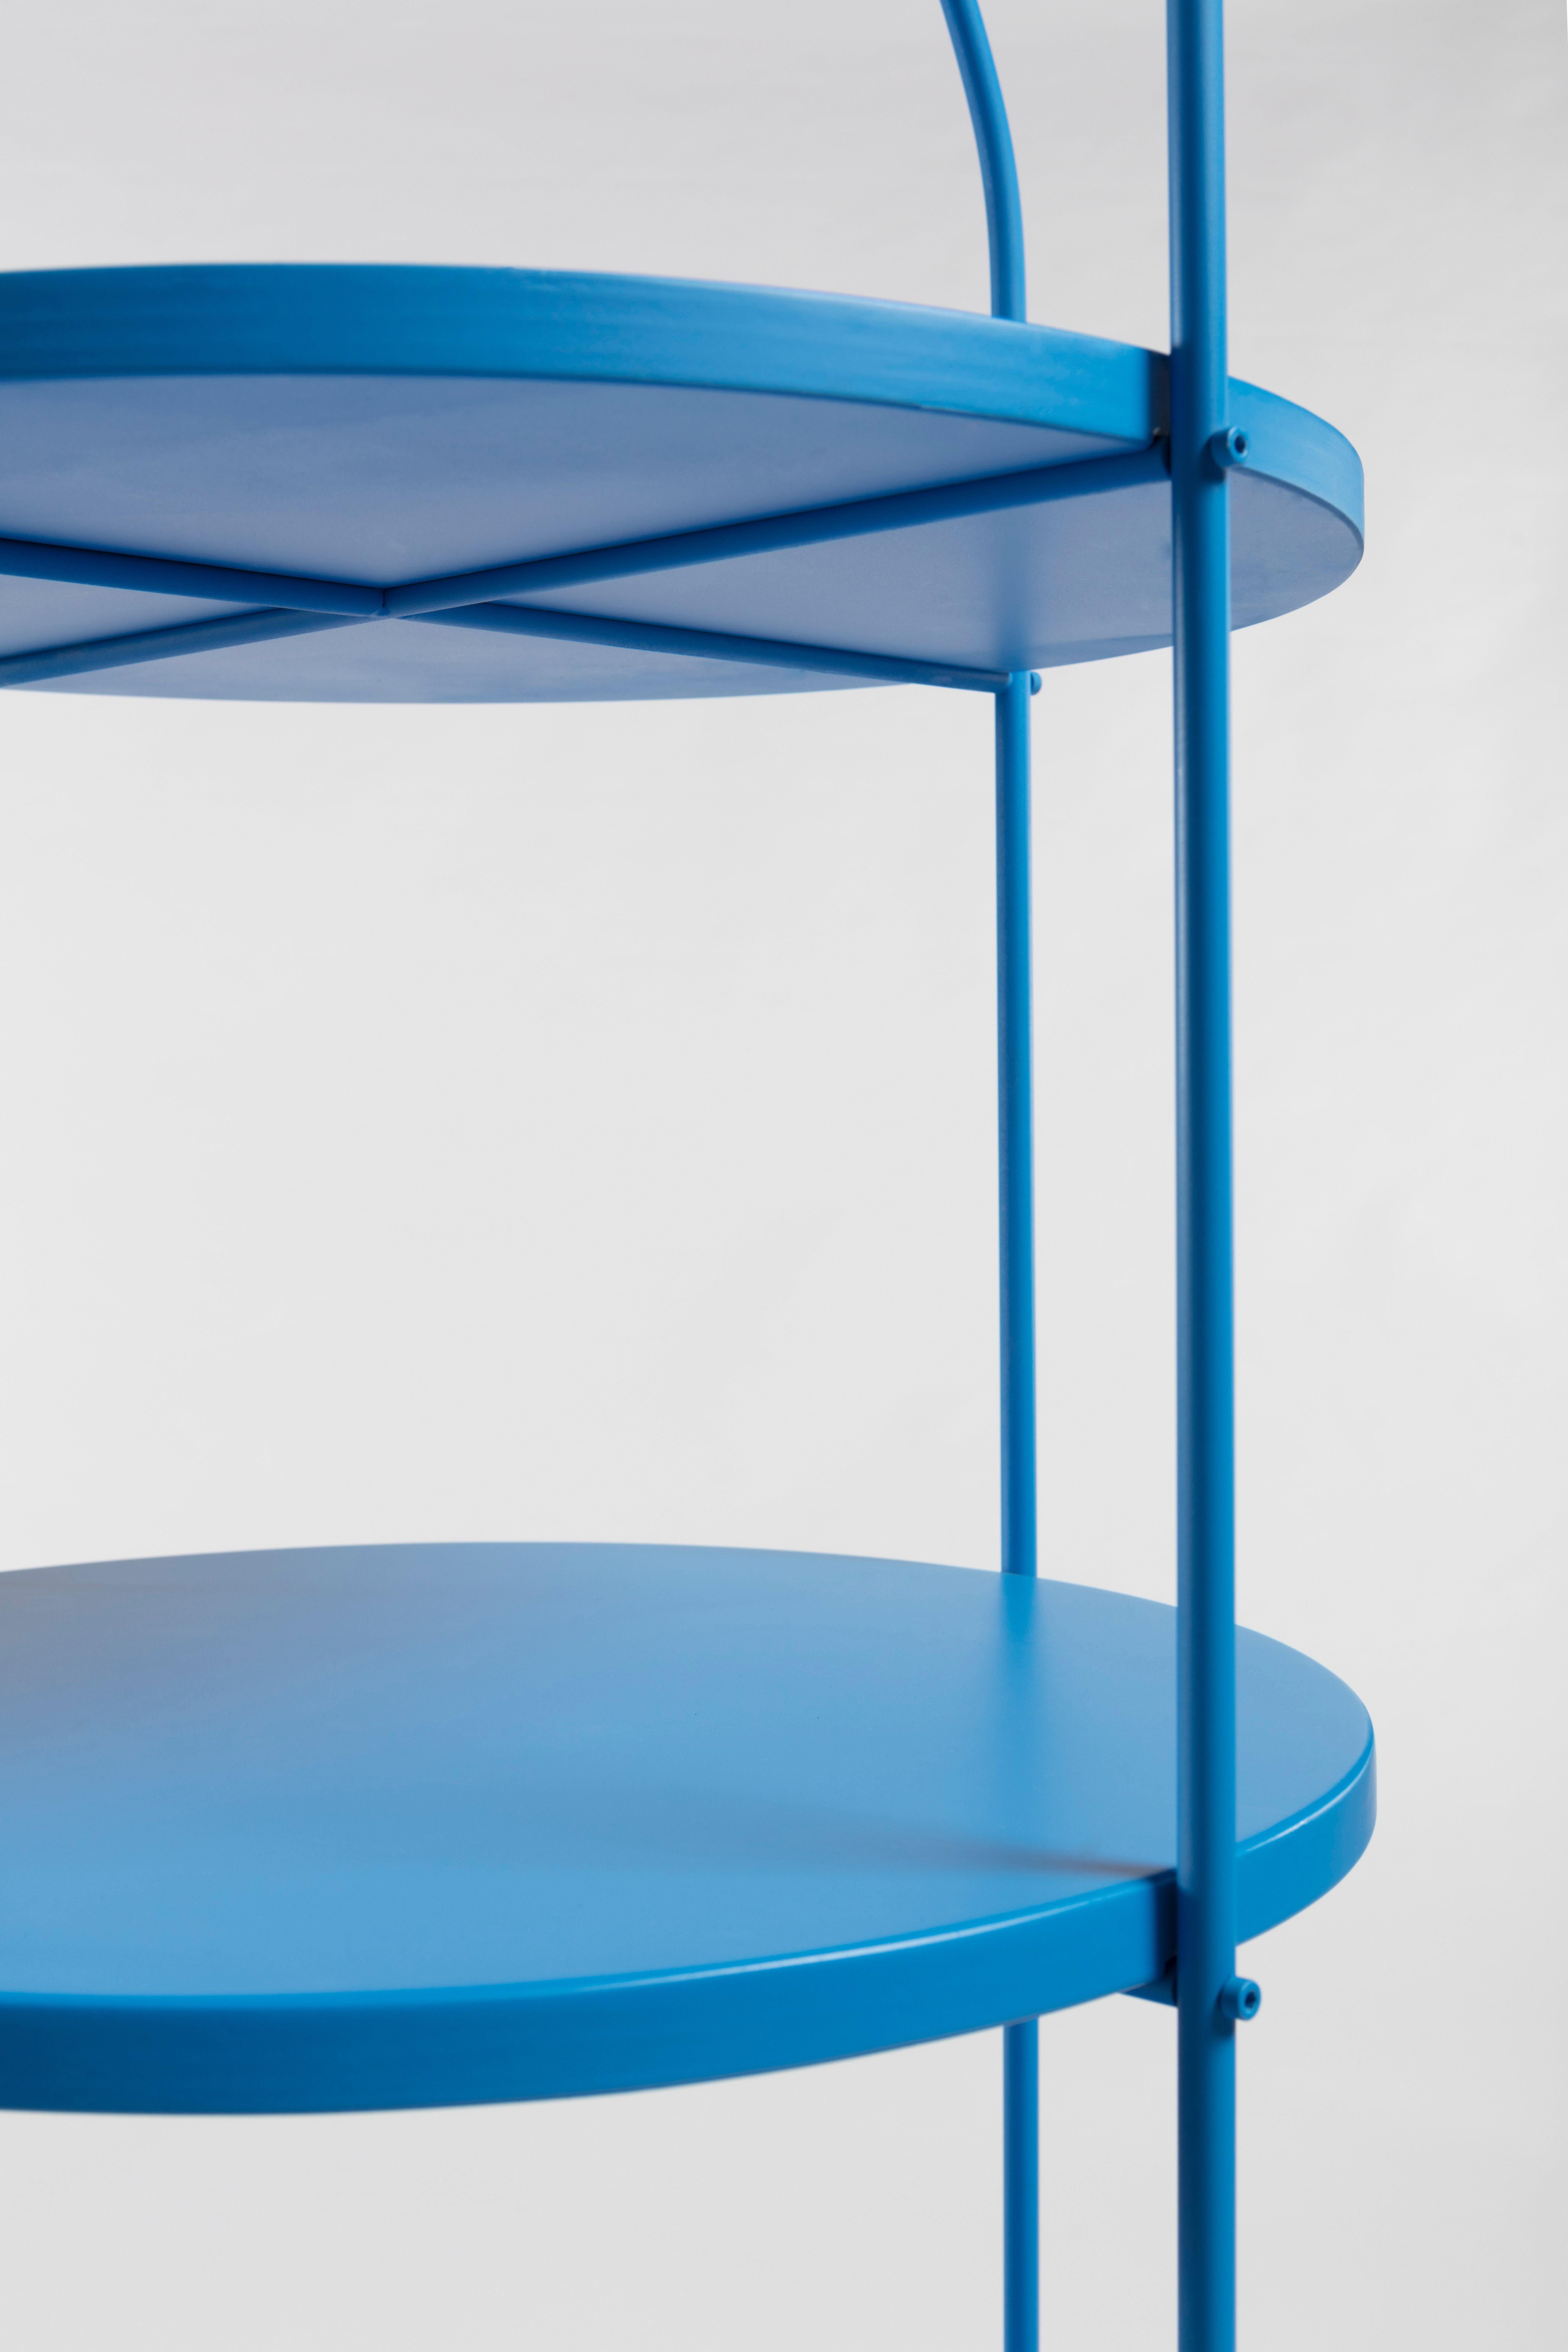 Tables on one or more levels, furnish ironically without remaining unnoticed. Ideal companions for public and private environments and contexts.
The structure is a curved metal round, with bolted beams, shelves and container in matte lacquered